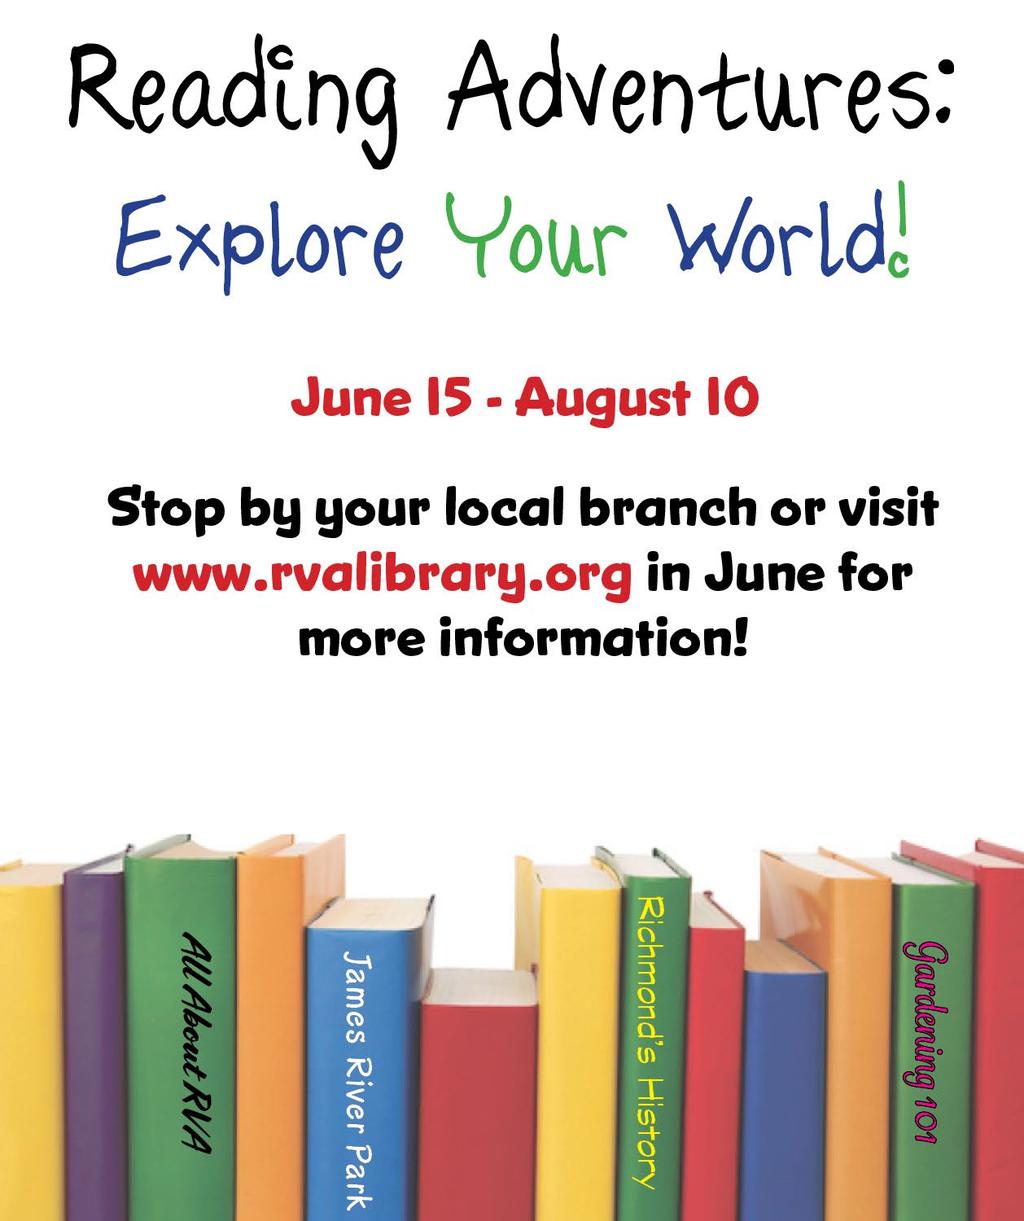 Richmond Public Libraries Homework Help Richmond Public Library has partnered with the Literacy Lab s Virginia Reading Corps to provide weekly homework help at most of our locations.